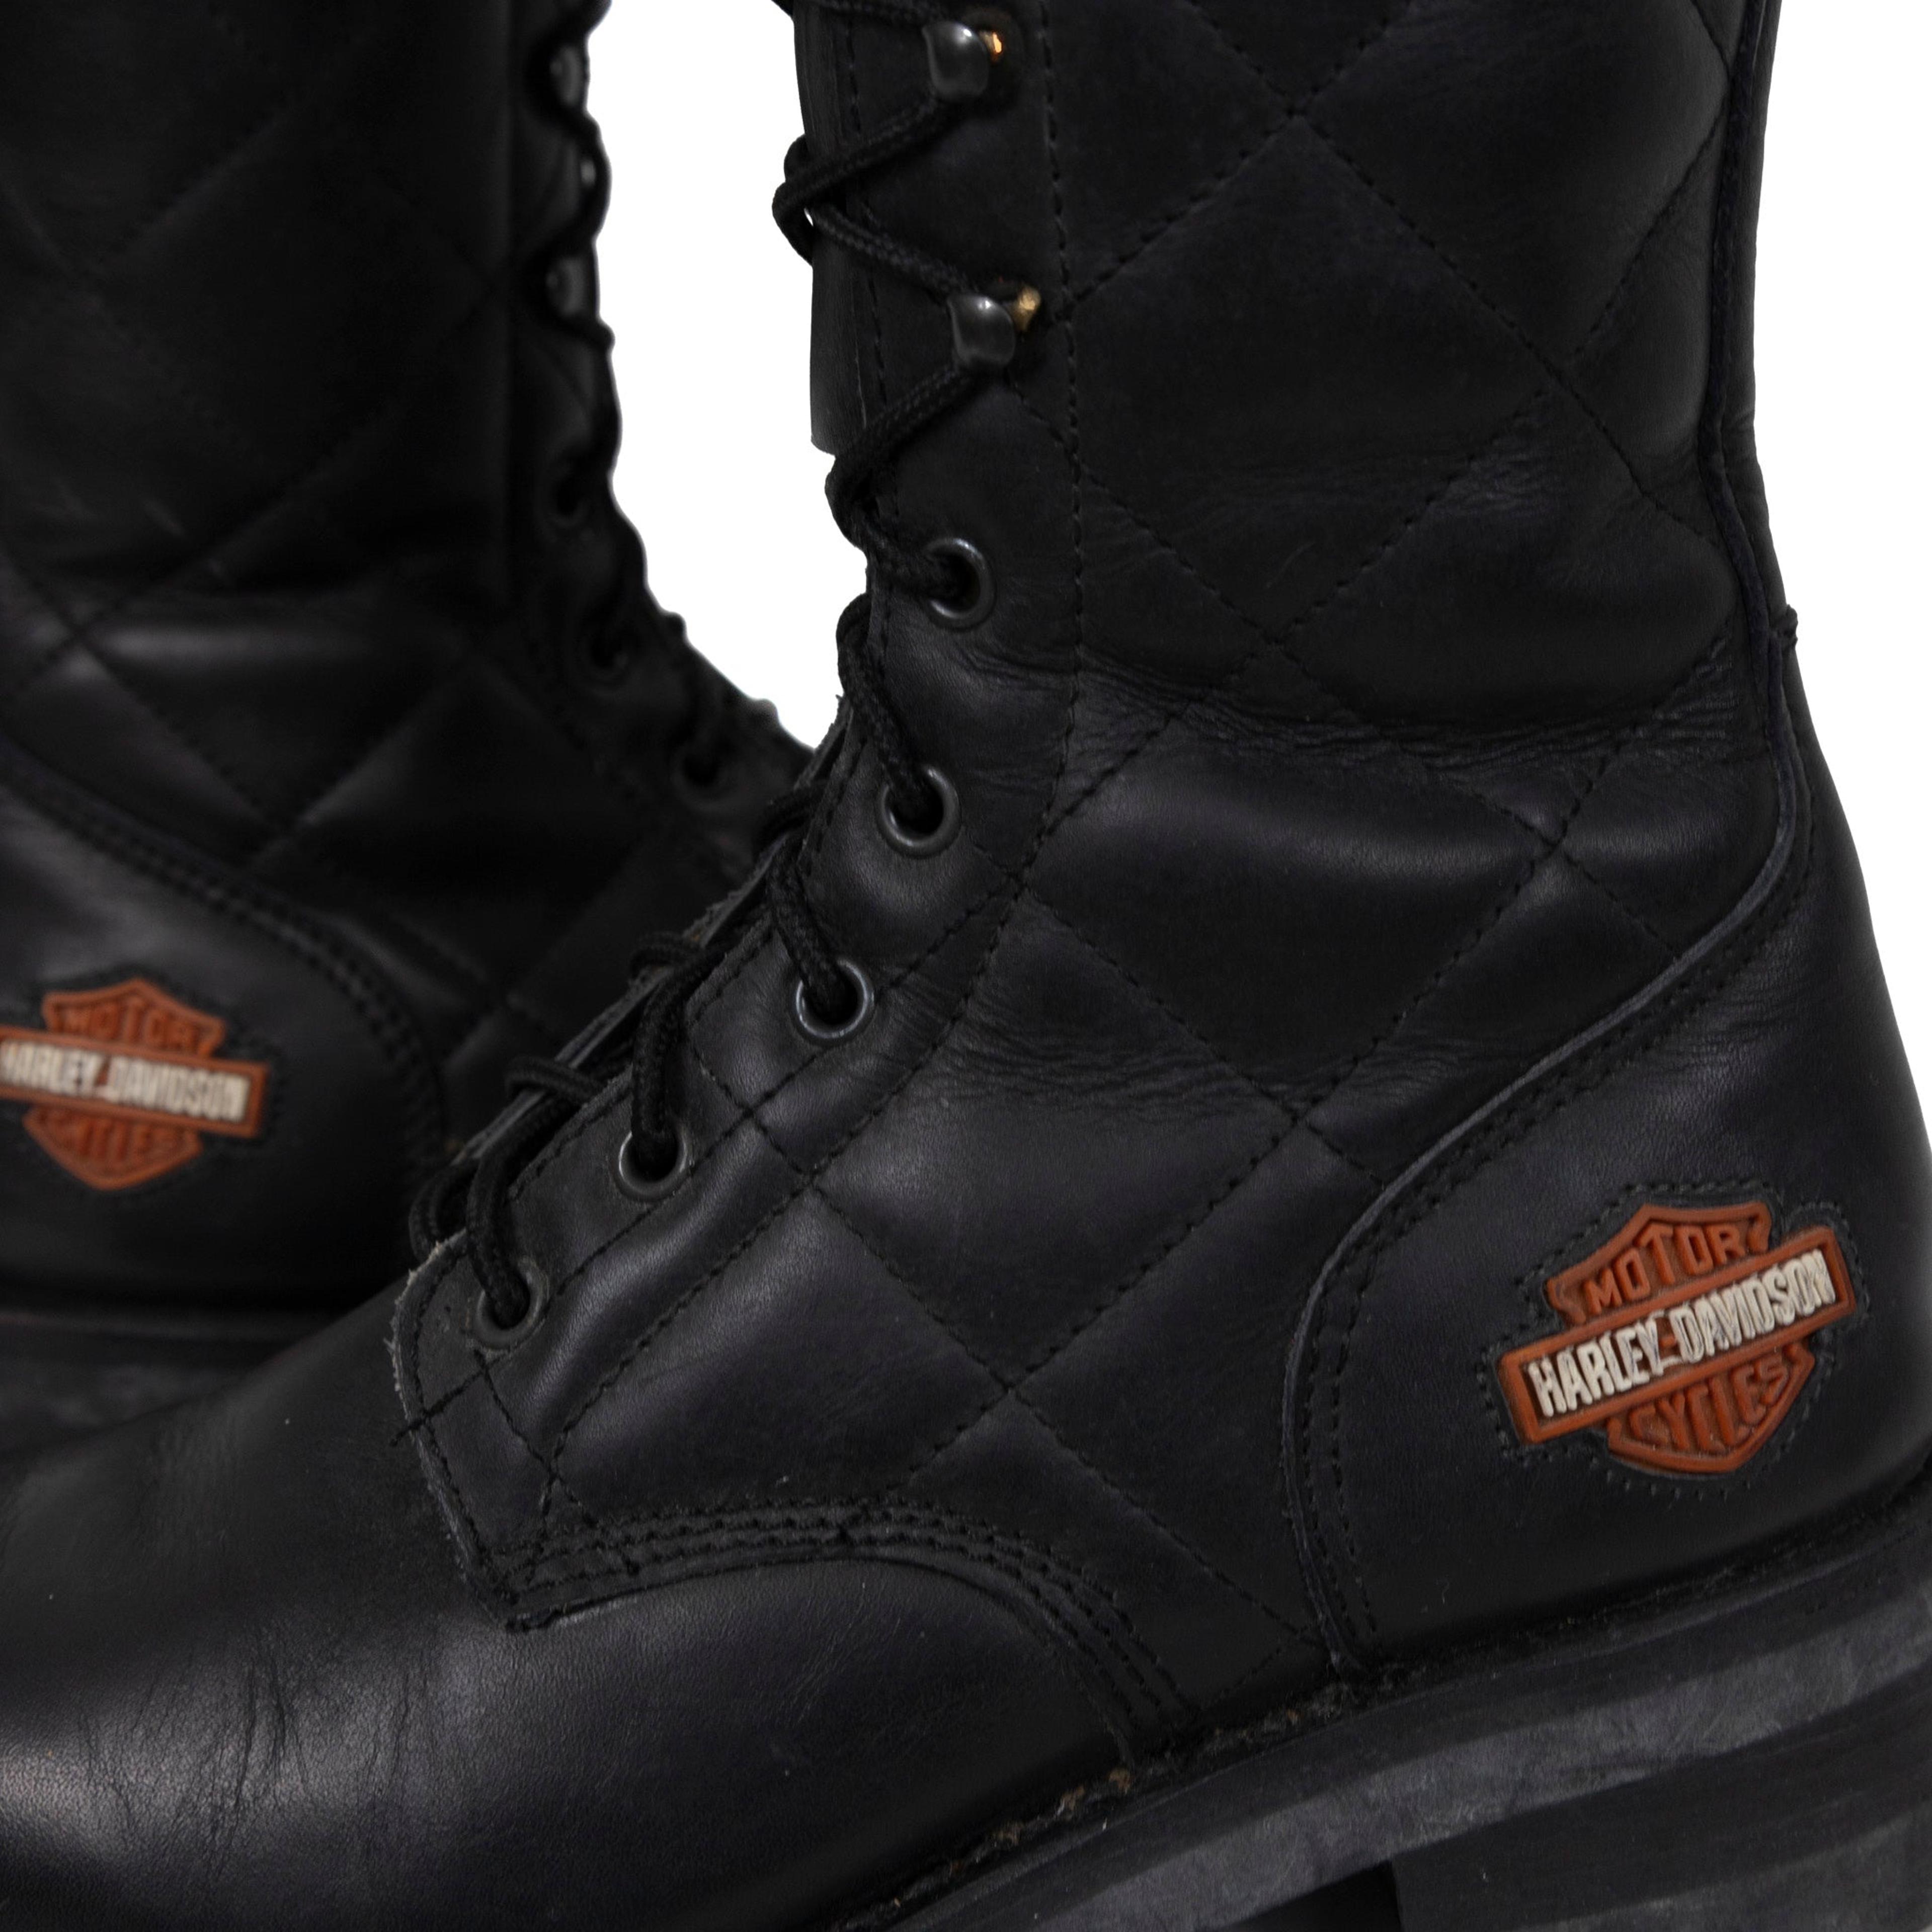 Alternate View 4 of Harley Davidson Racing XR750 Lace Up Biker Boots